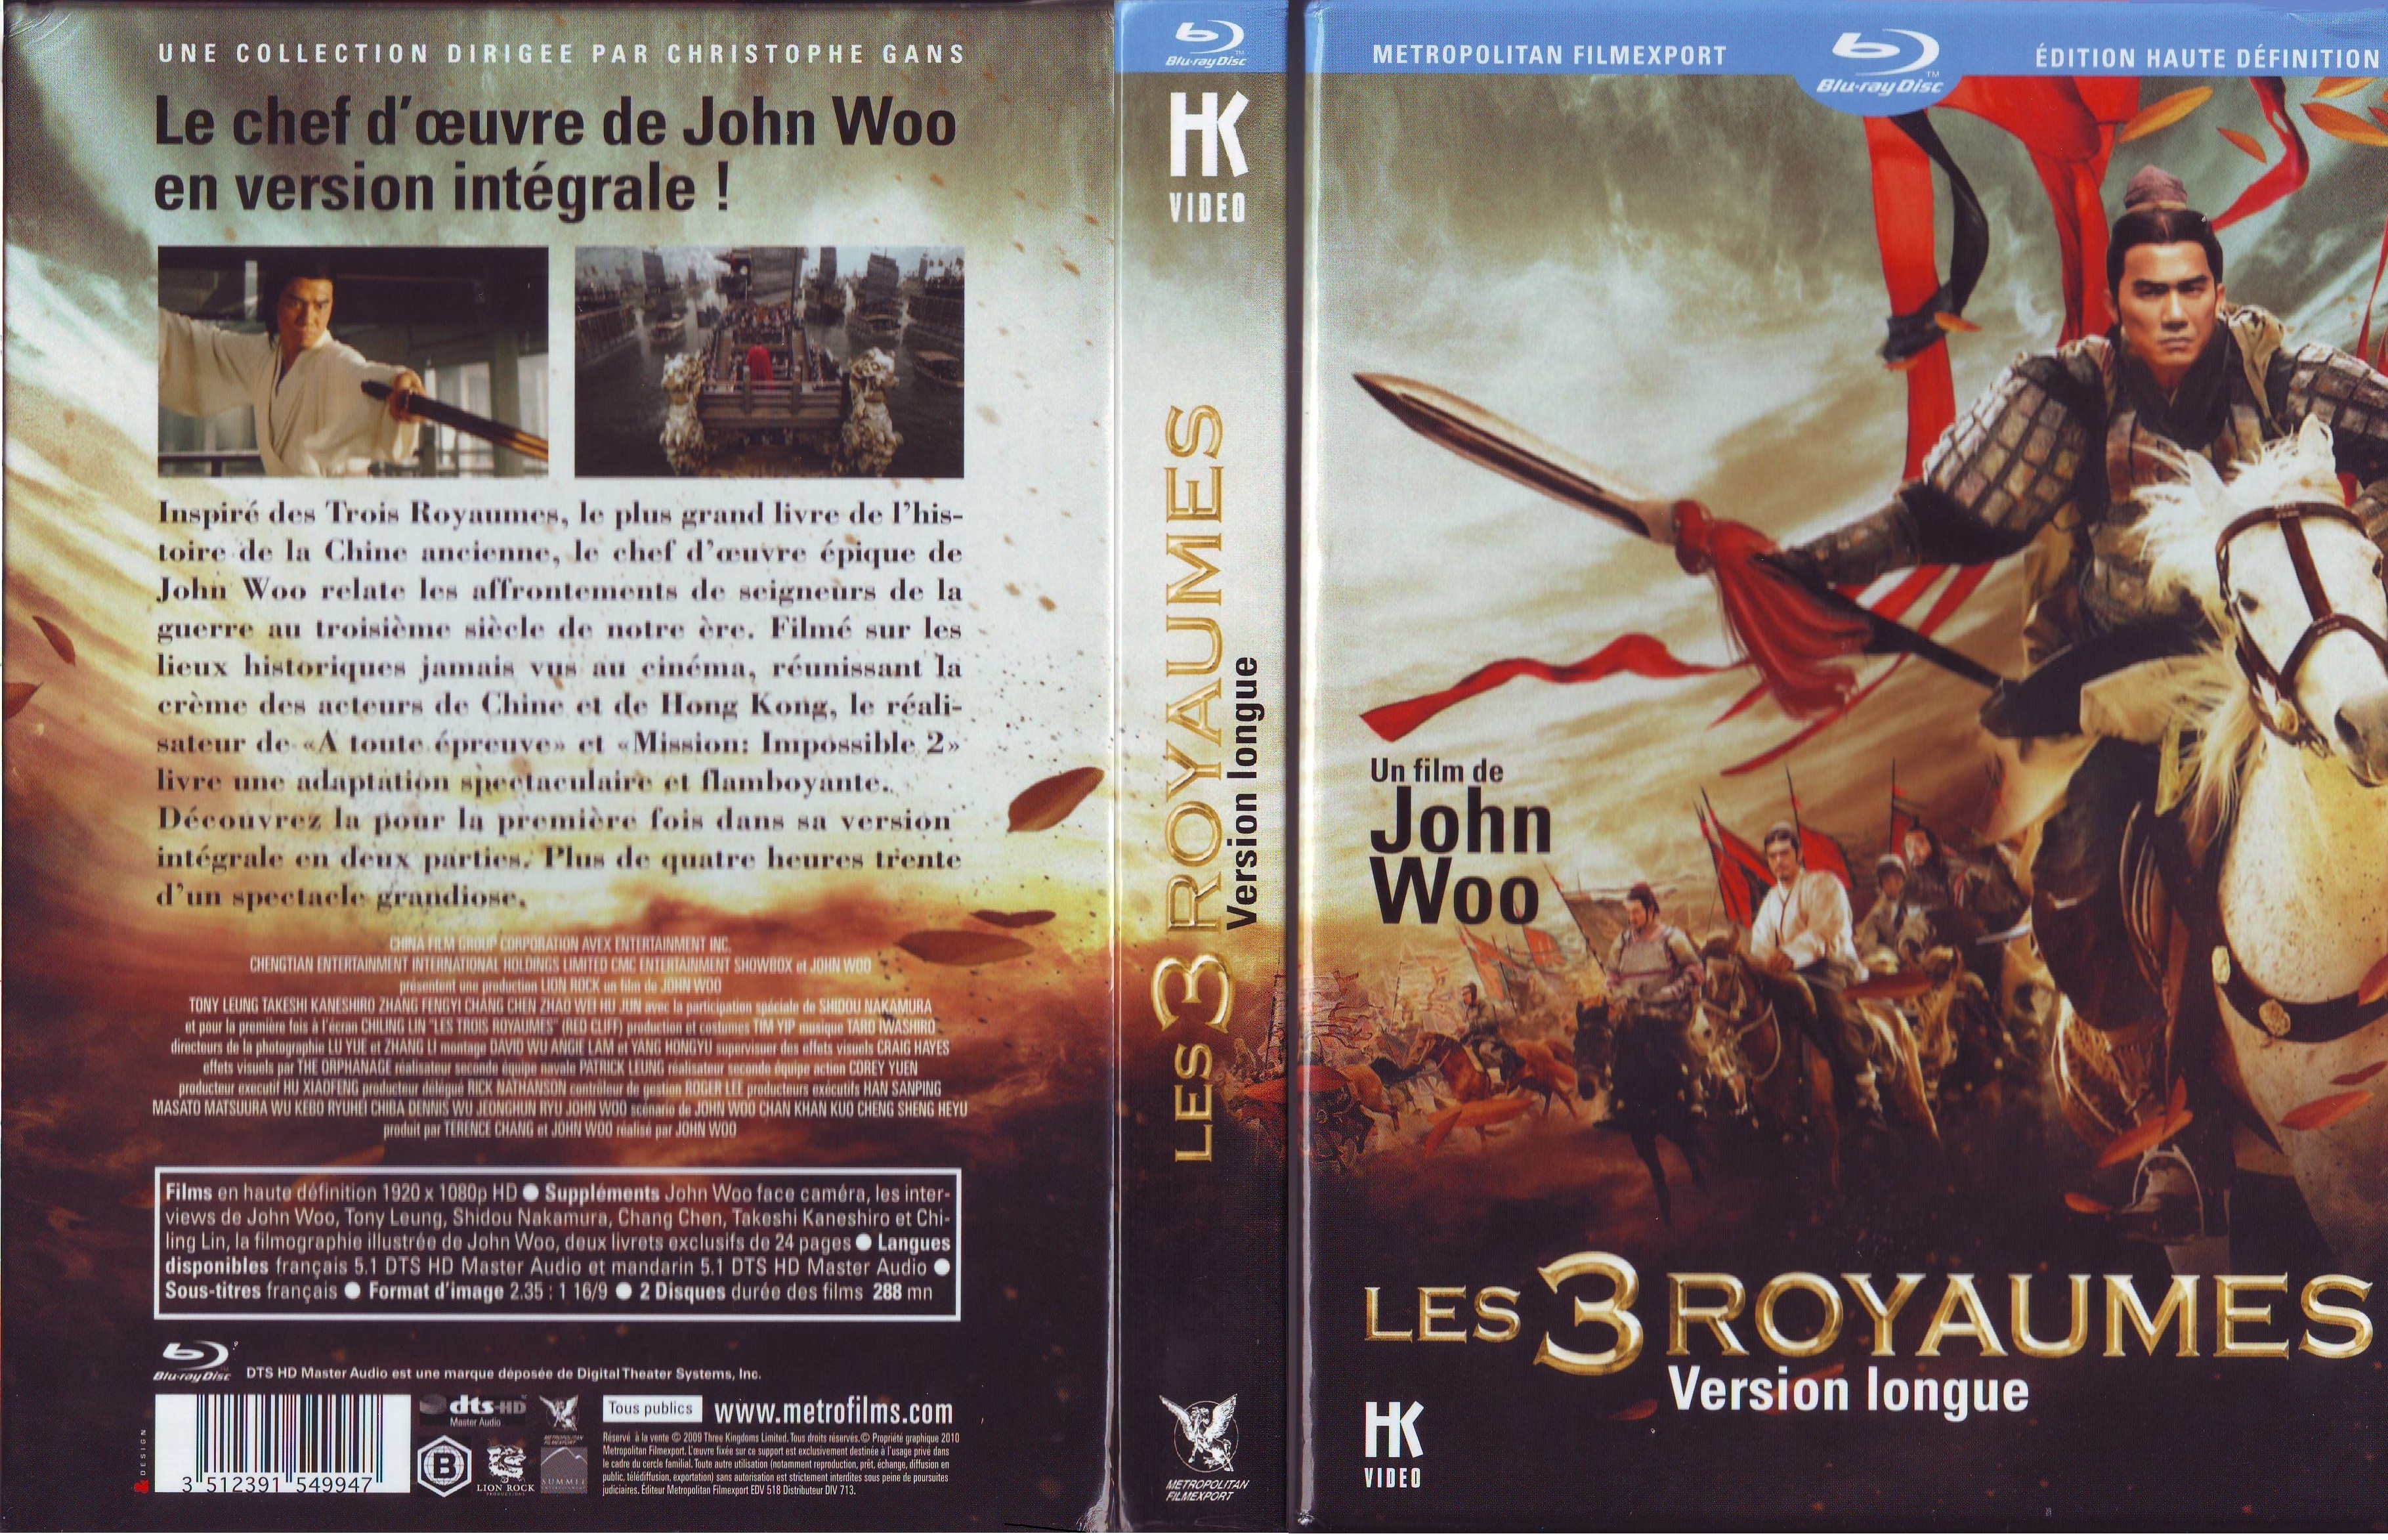 Jaquette DVD Les 3 royaumes (BLU-RAY)